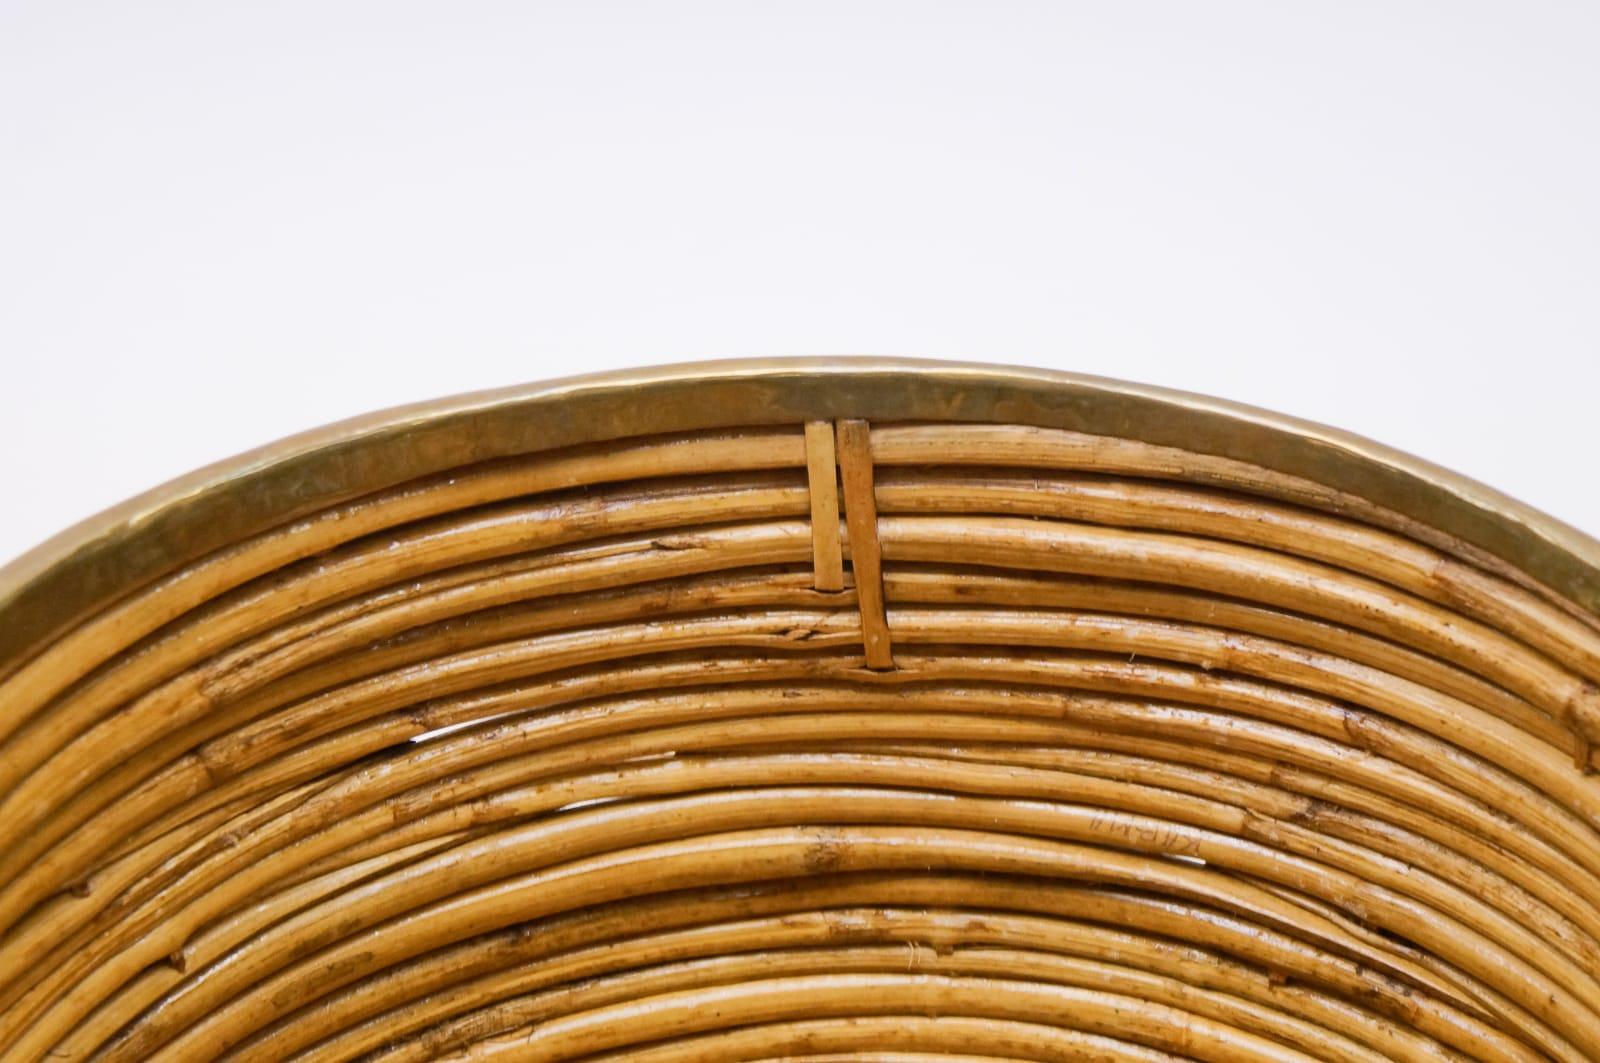 Large Rattan and Brass Midcentury Handcrafted Bowl, Austria, 1950s For Sale 4